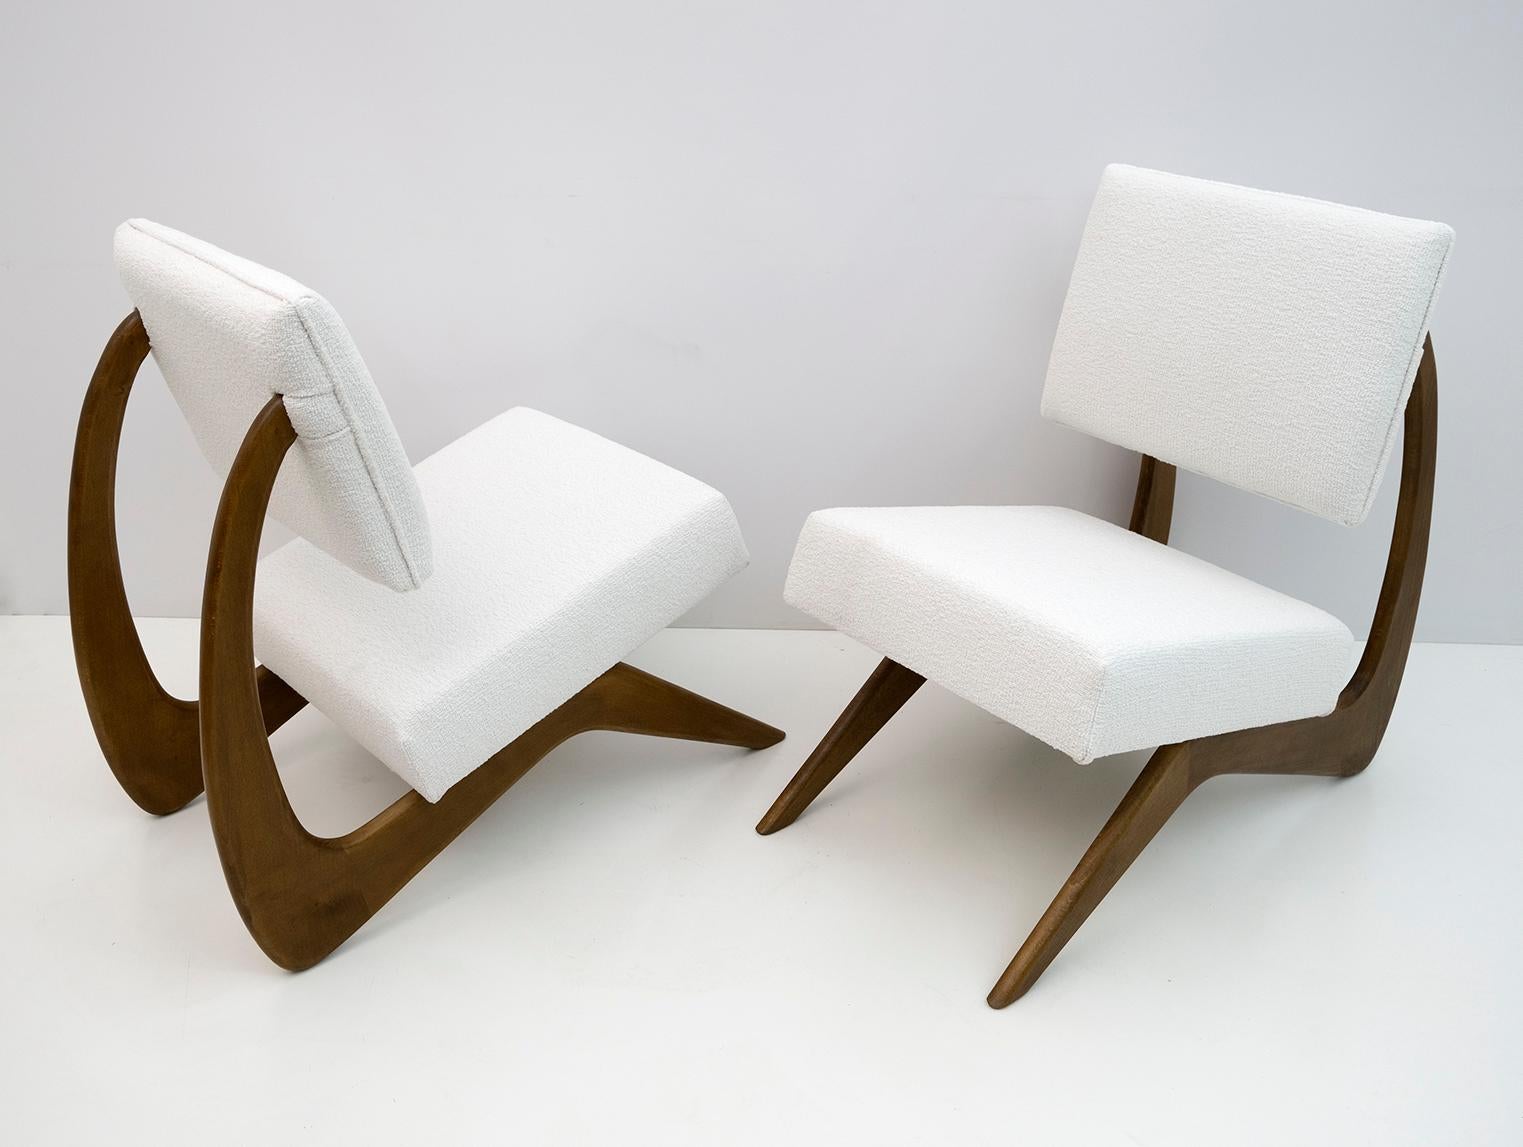 Pair of armchairs designed by the American designer Adrian Pearsall. The structure of these cocktail lounge chairs is made of walnut wood in a beautiful curved shape and upholstered in white chenille fabric. The armchairs have been restored and